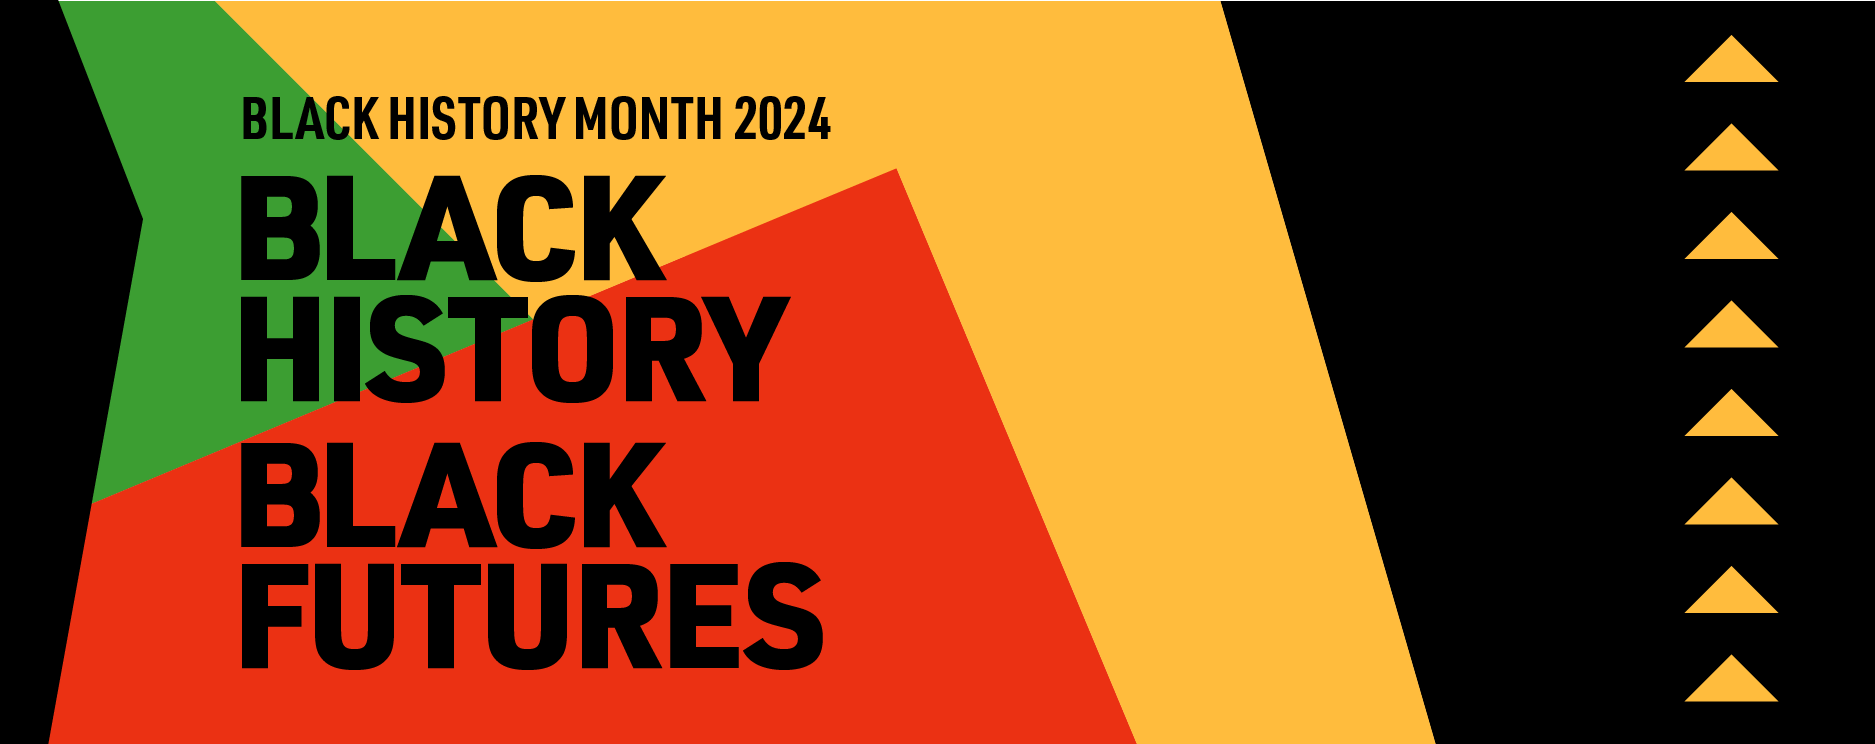 Green red yellow and black graphic with text Black History Month 2024 Black History Black Futures